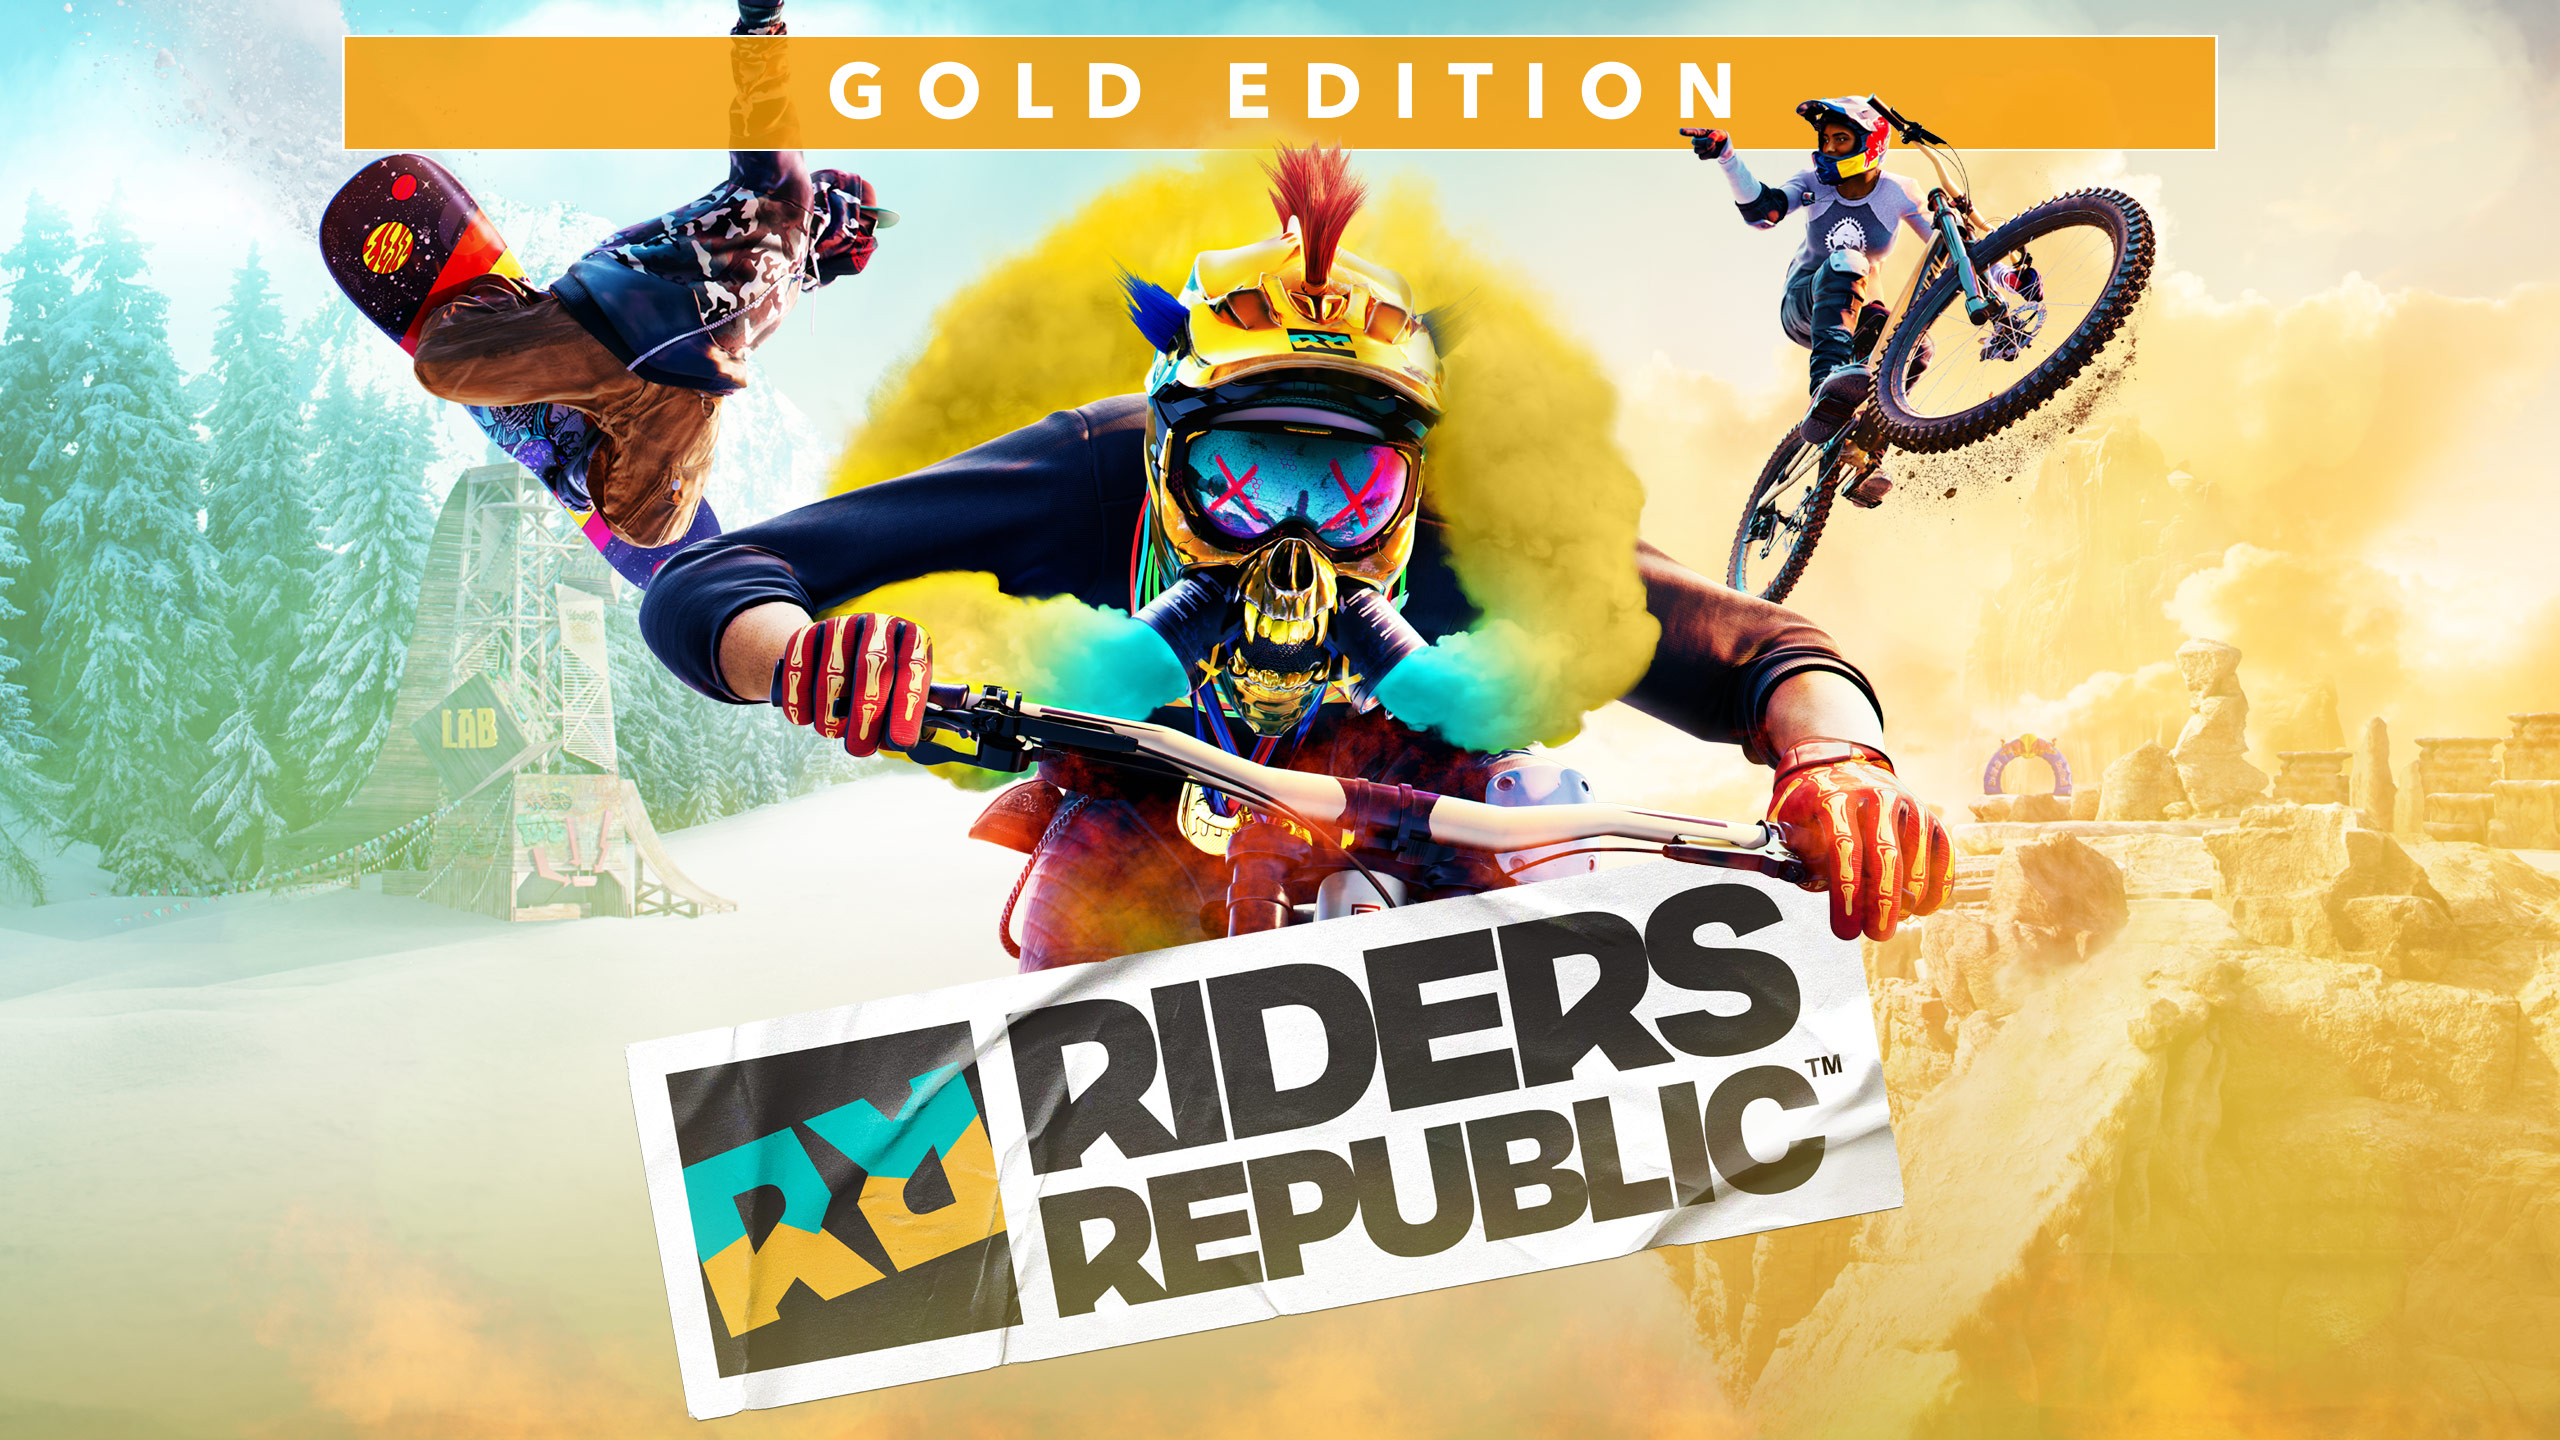 Gold Edition. Download and Buy Today Games Store